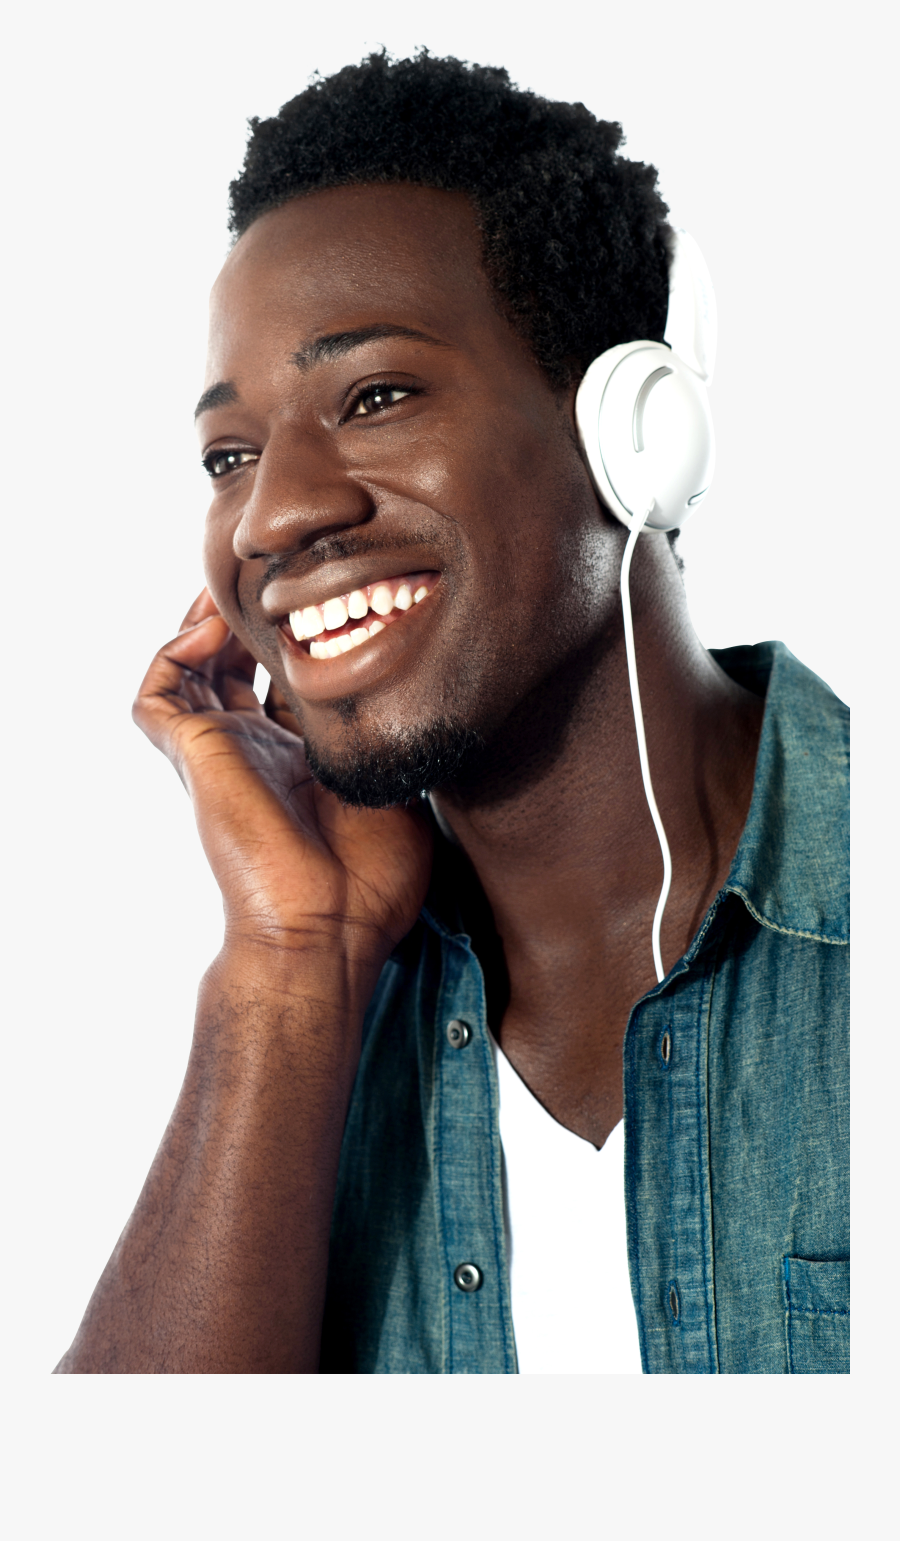 Listening Music Png Image - Listening To Music Transparent Background, Transparent Clipart